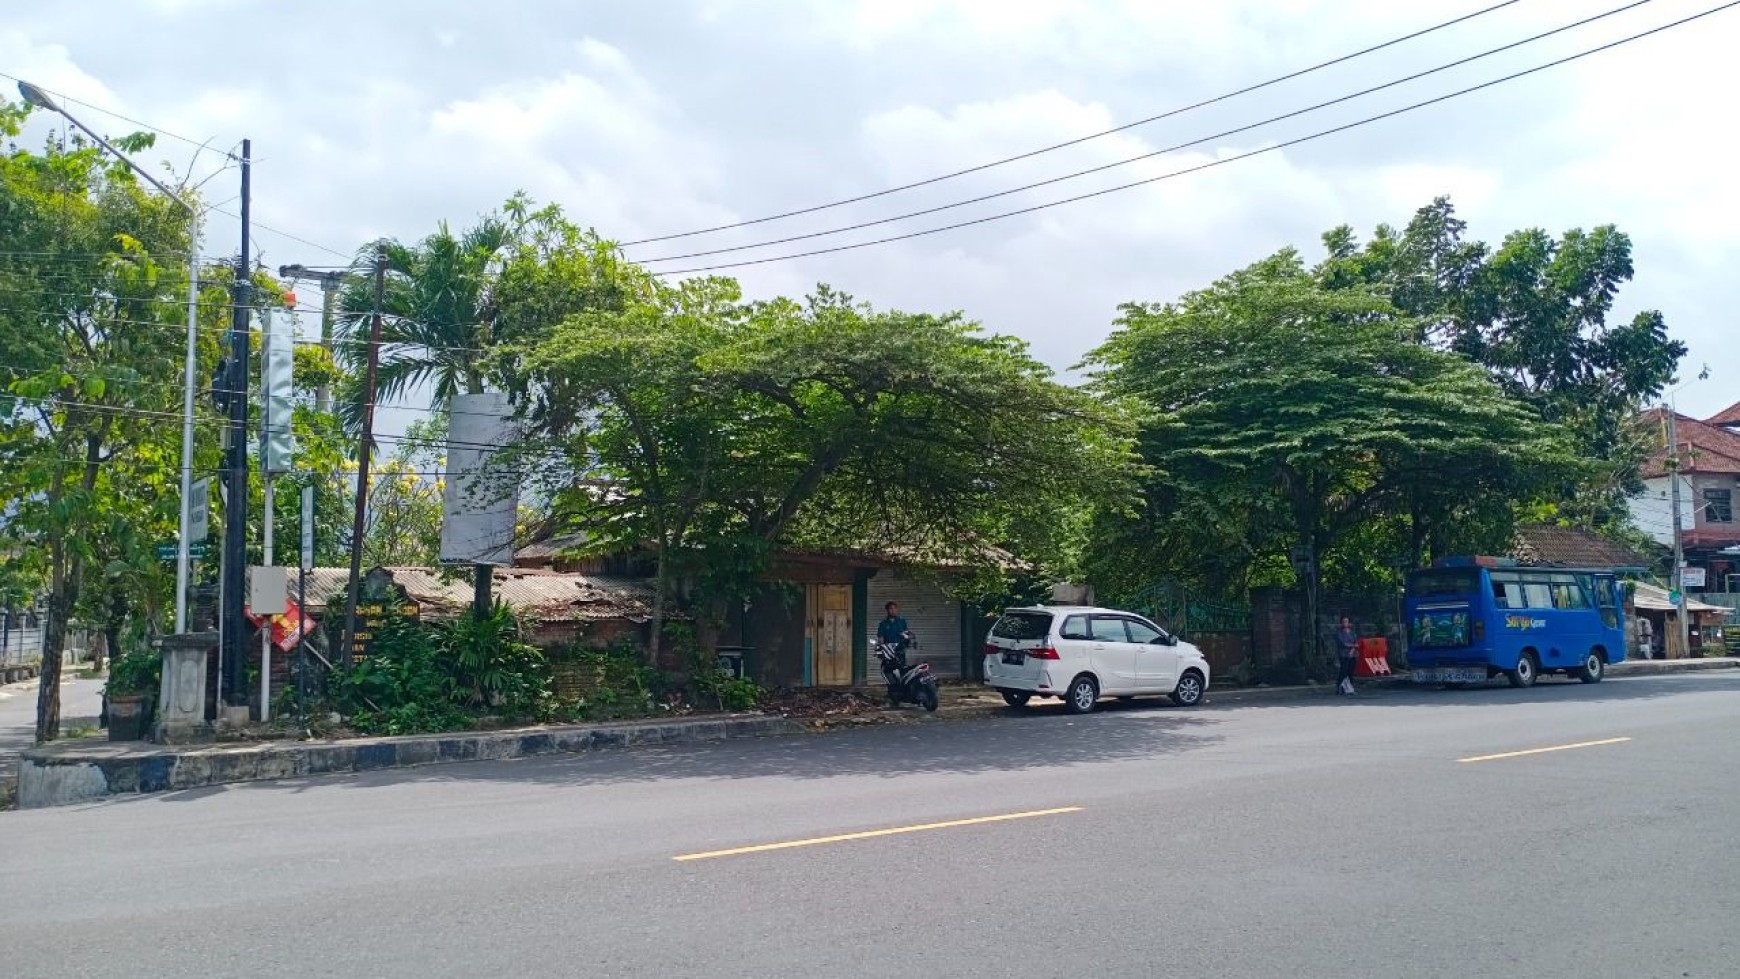 Land 980 Sqm Freehold in Great Location Jembrana